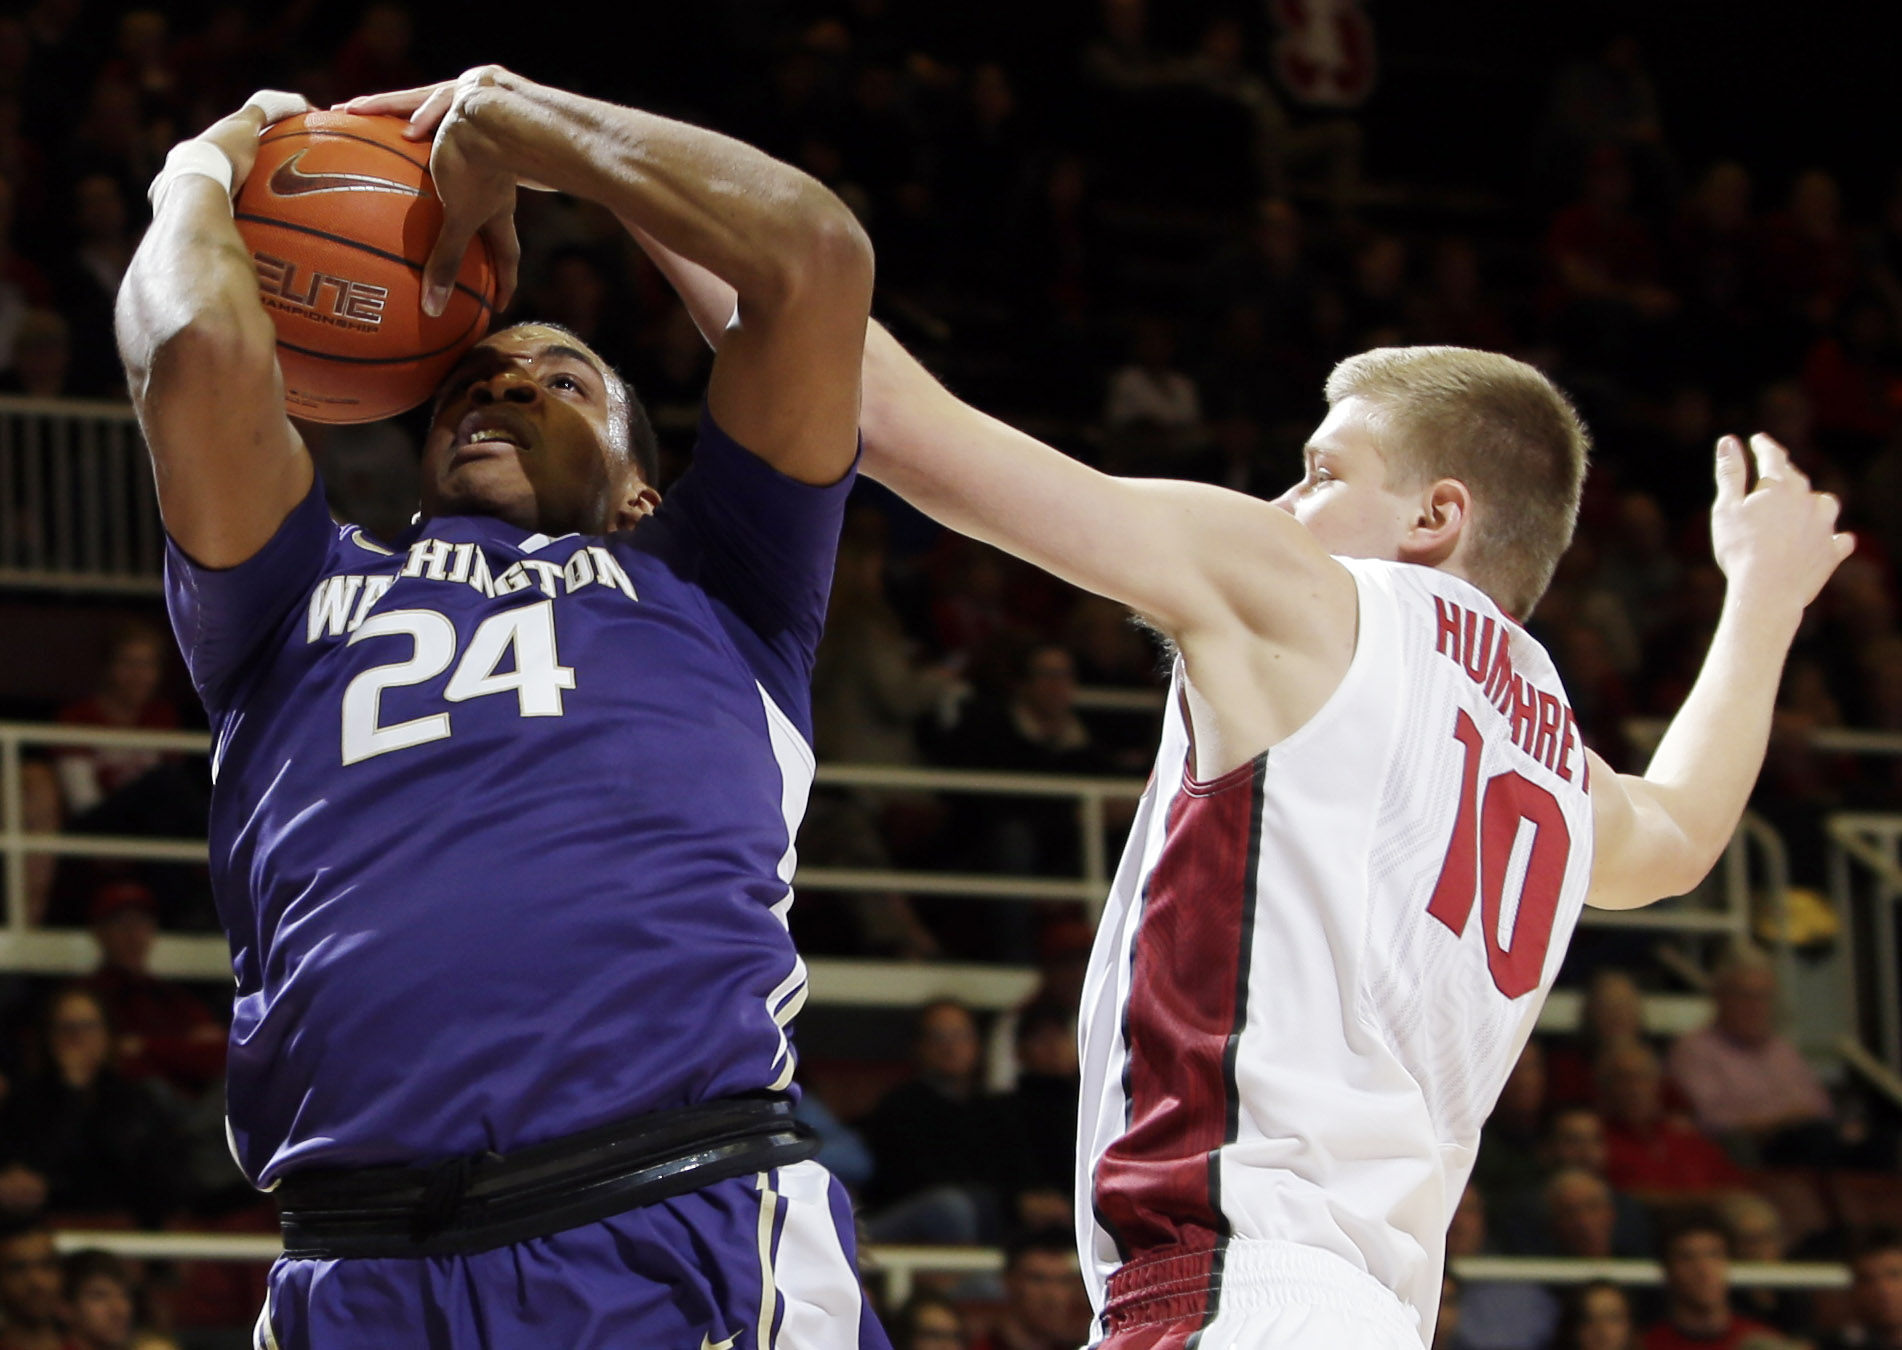 Washington center Robert Upshaw, left, tries to shoot as Stanford forward Michael Humphrey defends during the first half Sunday, Jan. 4, 2015, in Stanford, Calif.